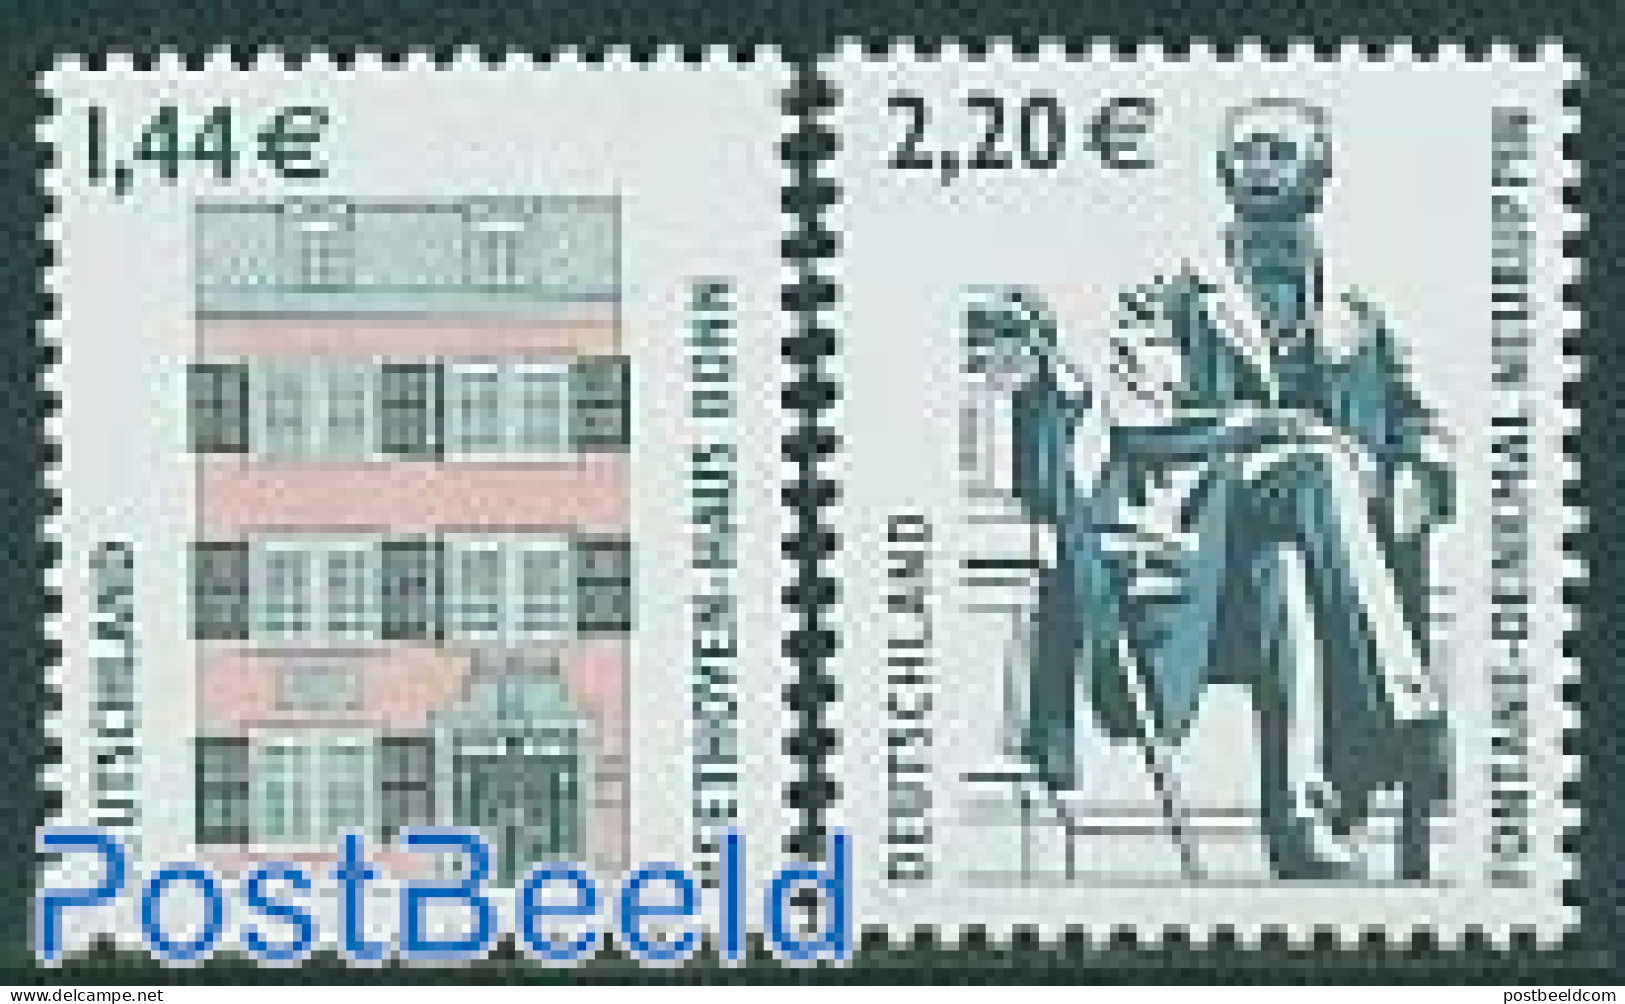 Germany, Federal Republic 2003 Definitives 2v, Mint NH, Art - Architecture - Sculpture - Neufs